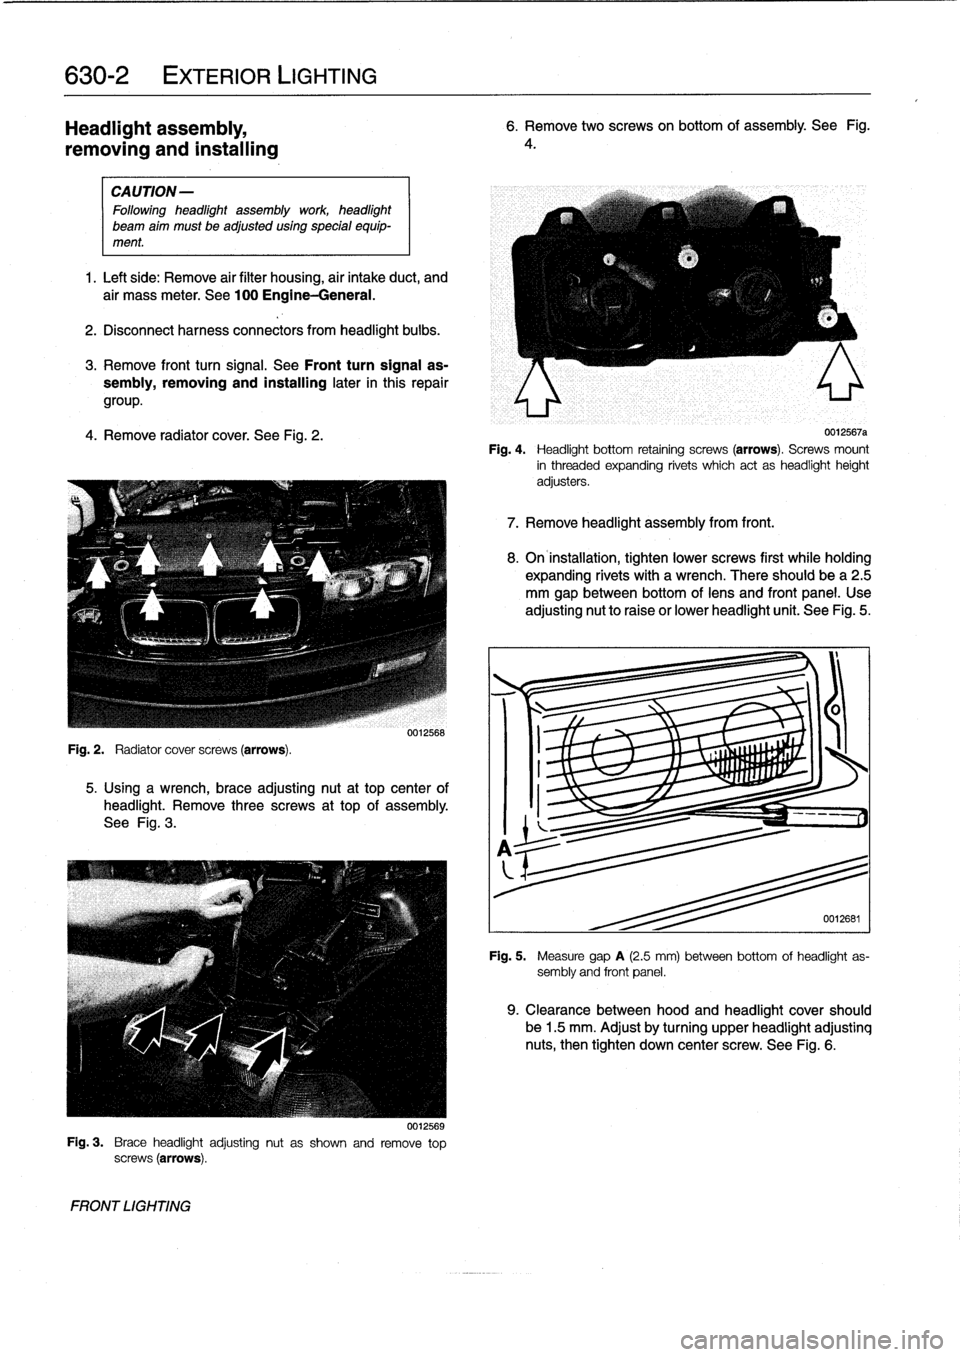 BMW 325i 1996 E36 Workshop Manual 
630-2

	

EXTERIOR
LIGHTING

Headlight
assembly,

removing
and
installing

CAUTION-

Followingheadlight
assembly
work
headlight

beam
aim
must
be
adjusted
using
special
equip-
ment
.

1
.
Left
side
: